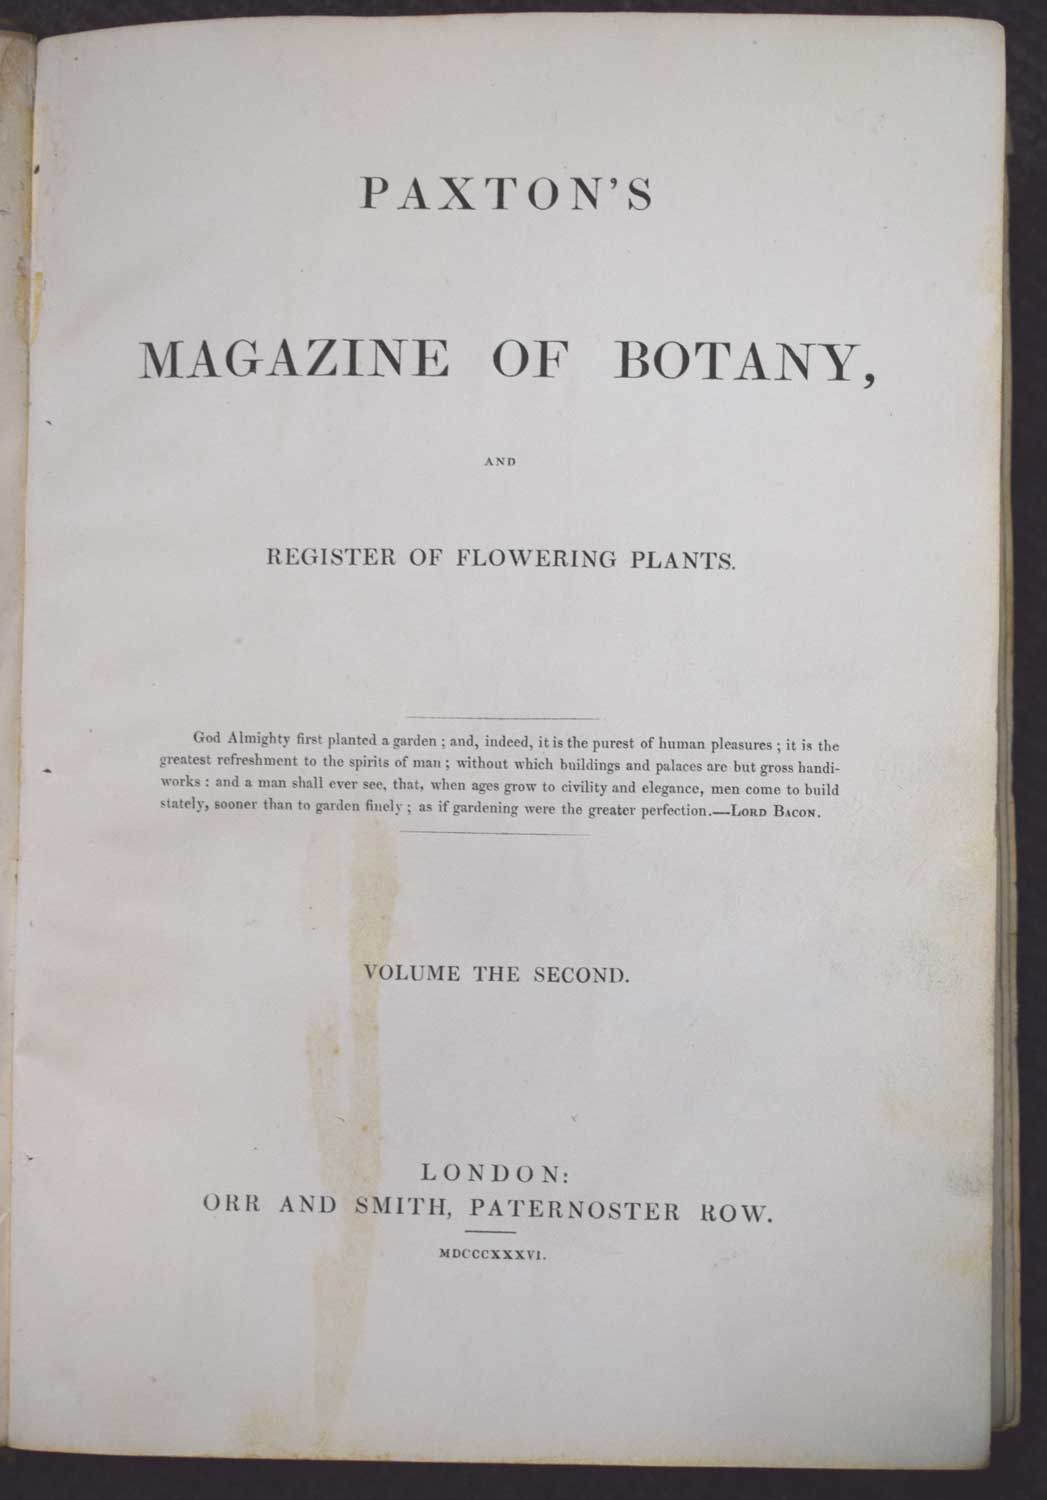 Paxton's Magazine of Botany, and Register of Flowering Plants. Volume II.